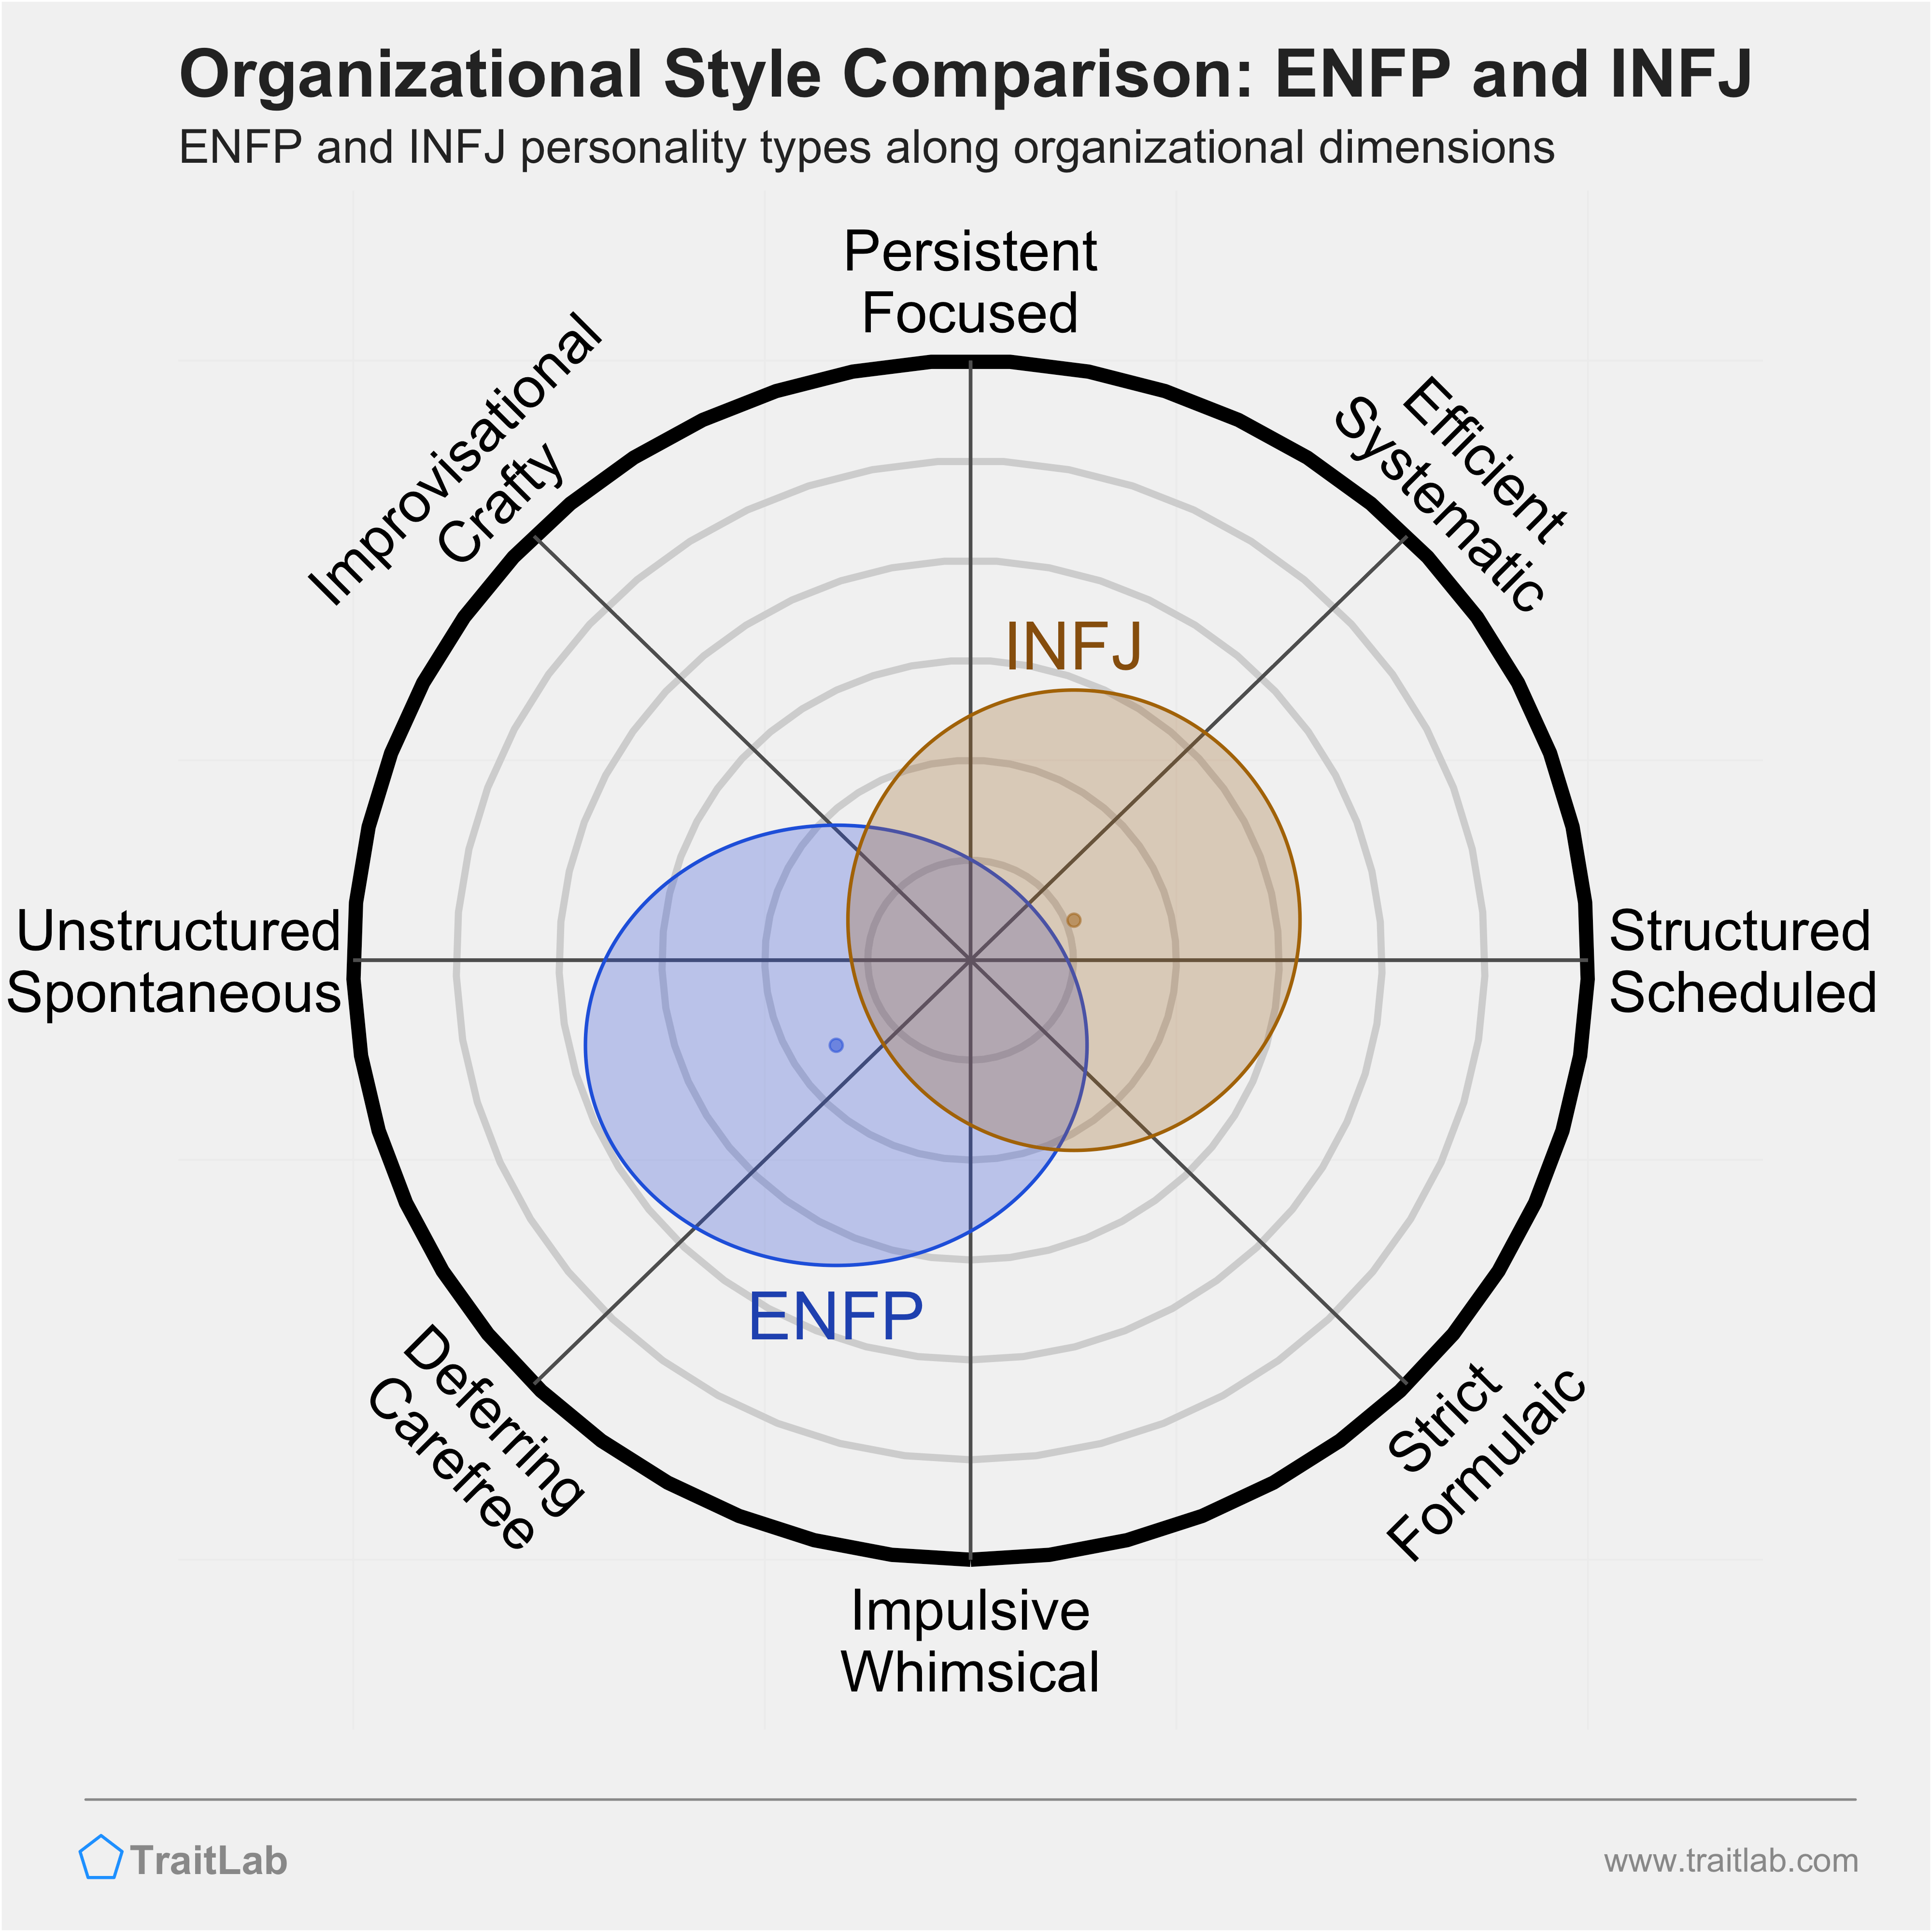 ENFP and INFJ comparison across organizational dimensions